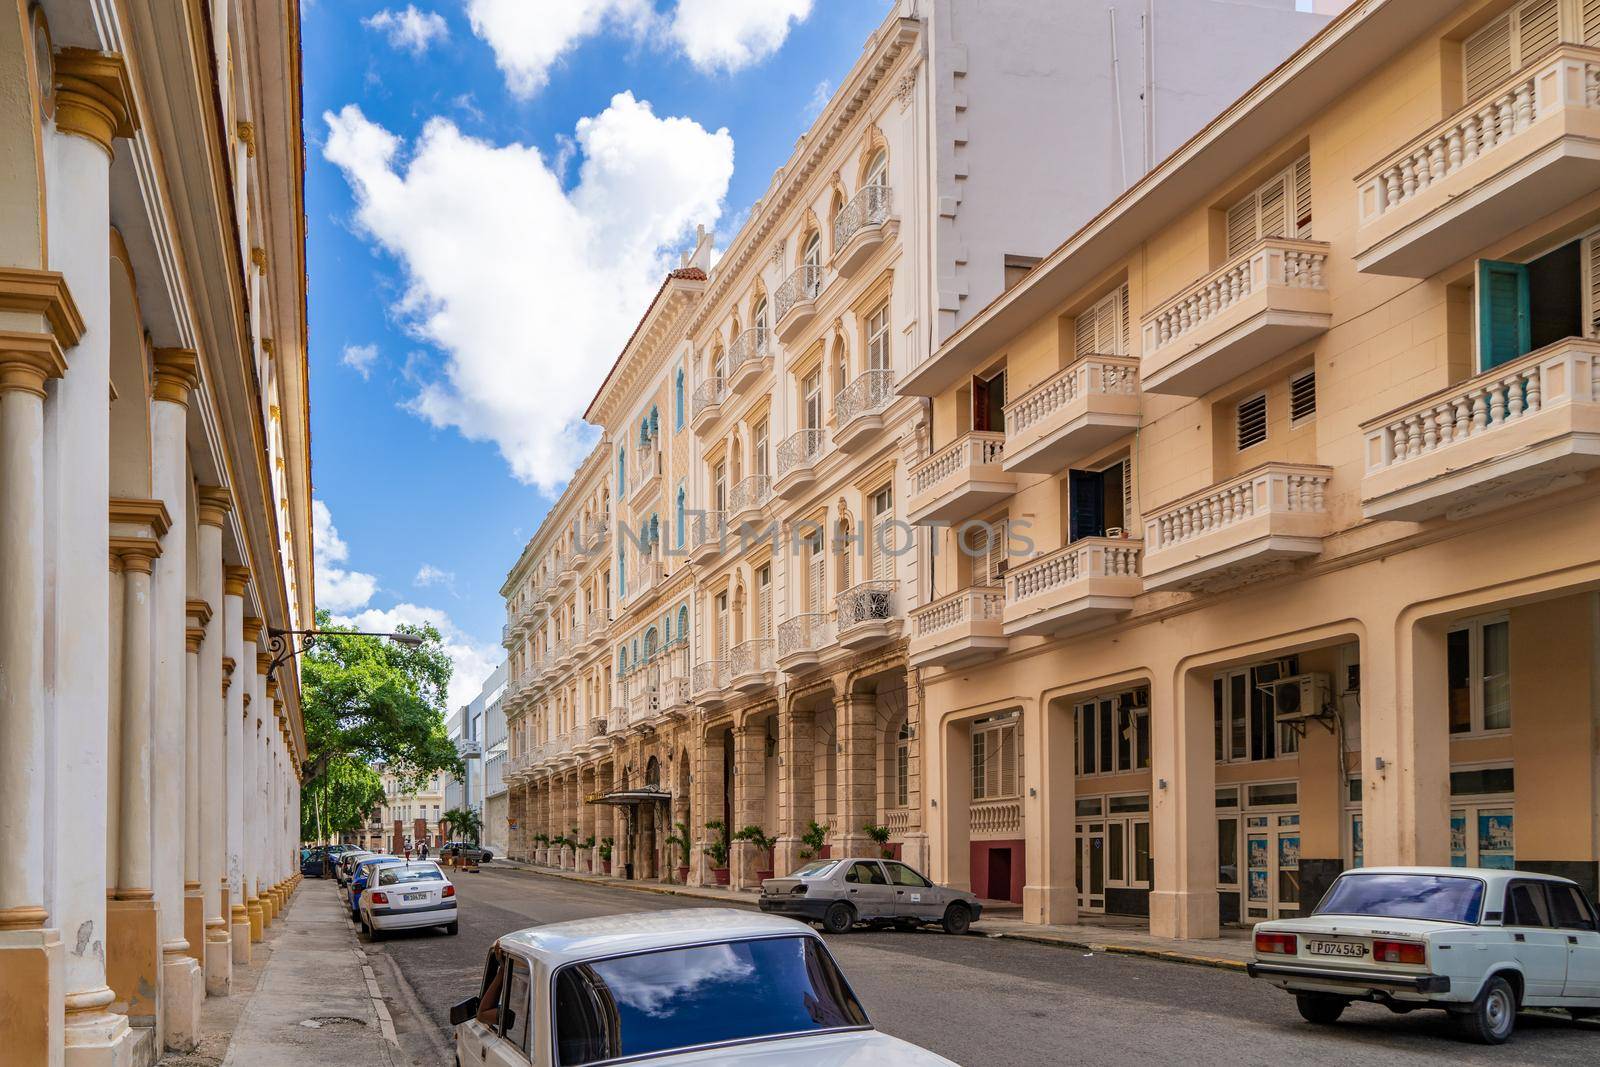 Havana Cuba. November 25, 2020: View of the street and the facade of the Hotel Sevilla, a place visited by tourists